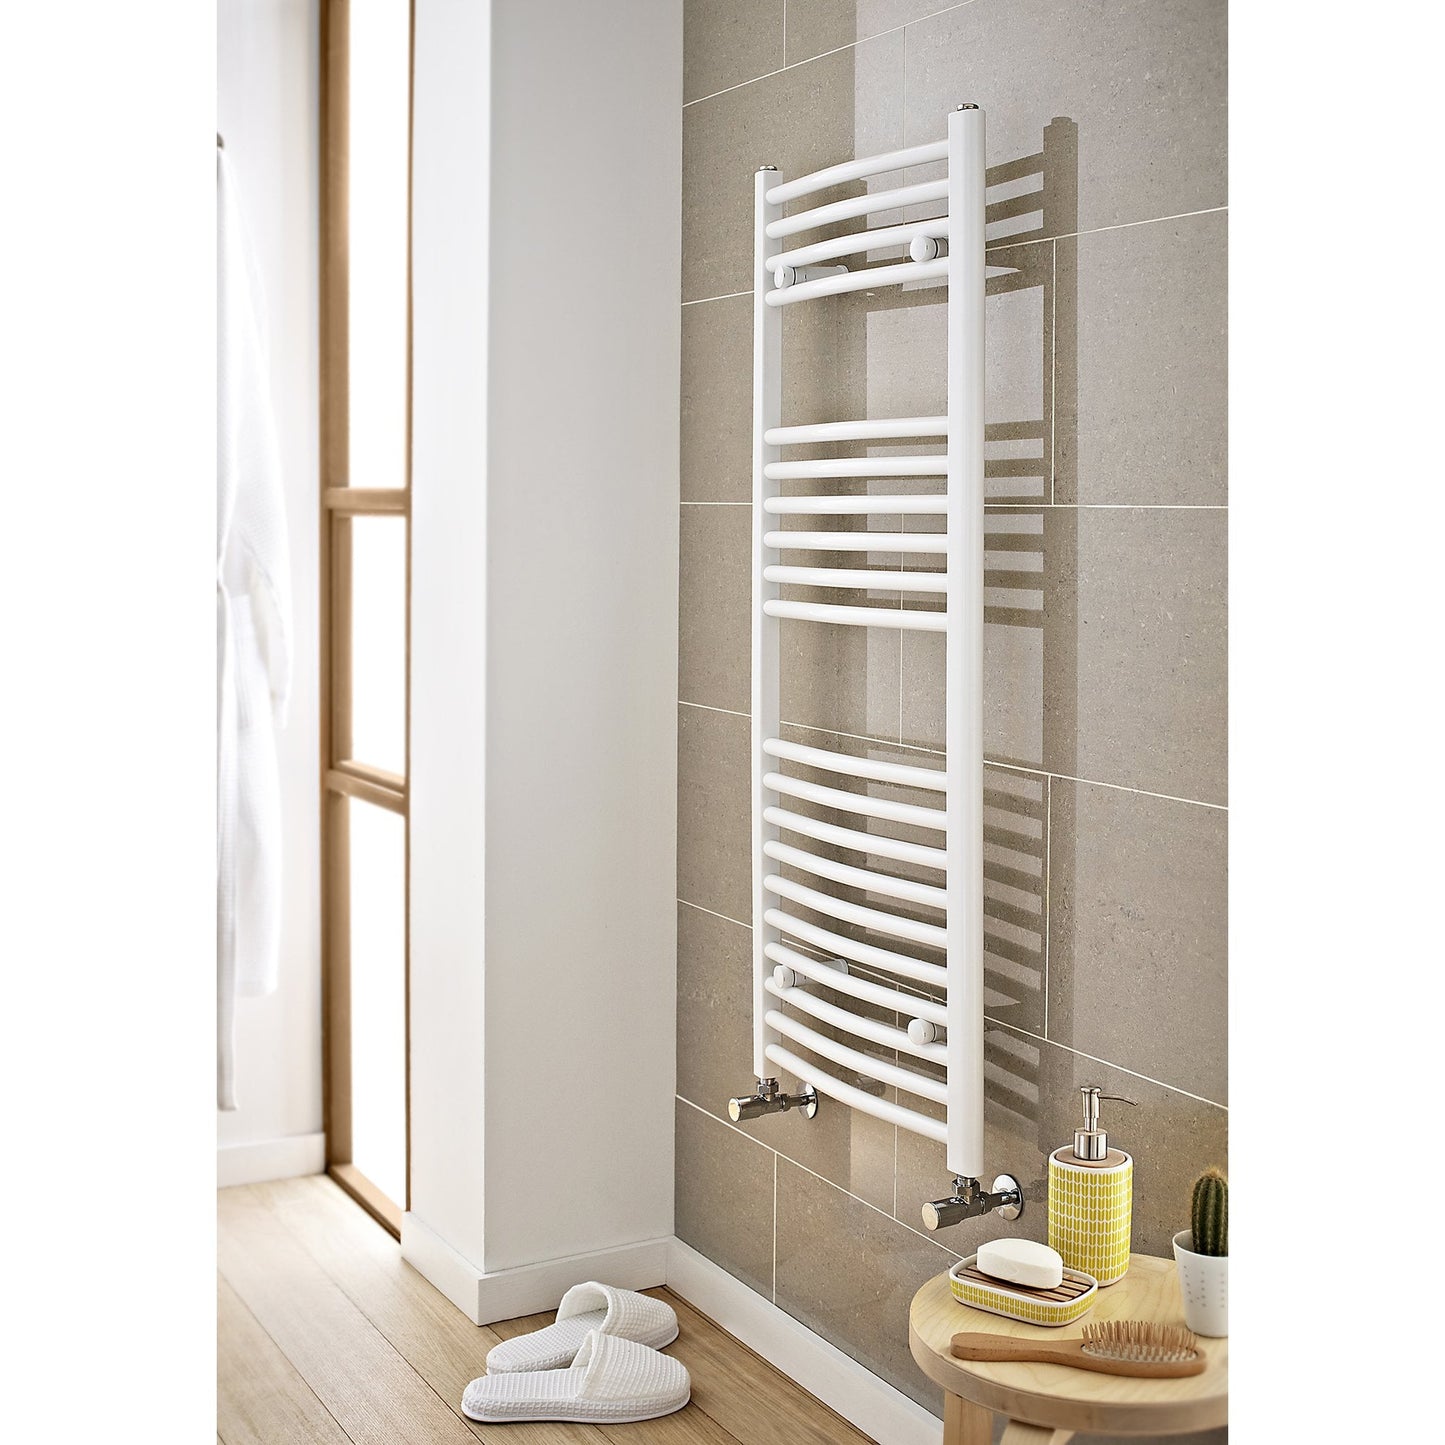 Curved Towel Rail 300mm x 1200mm White